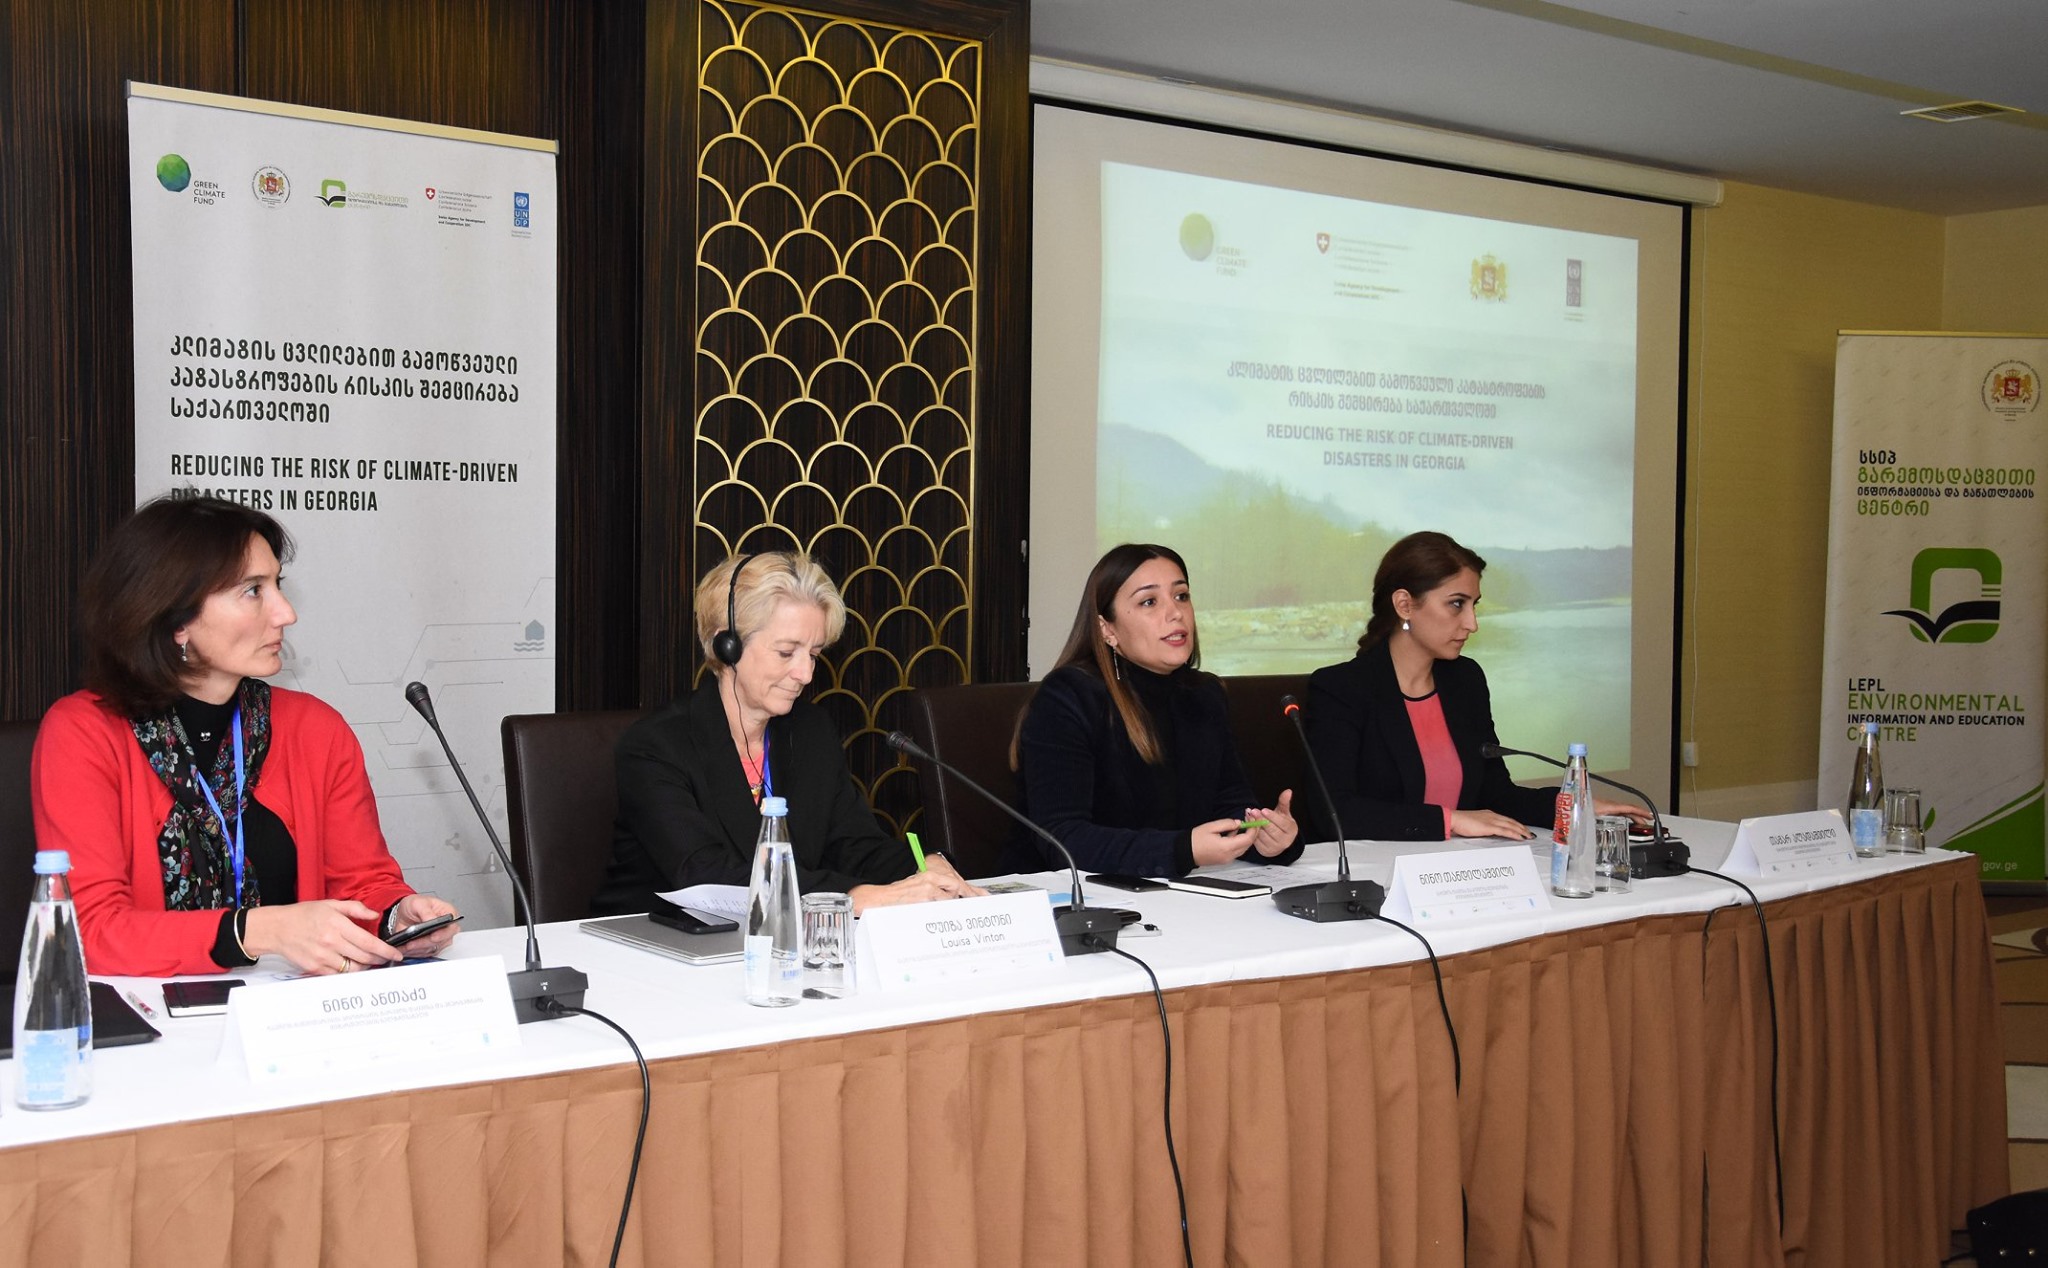 The project "Reducing the risk of climate-driven disasters in Georgia" has been launched